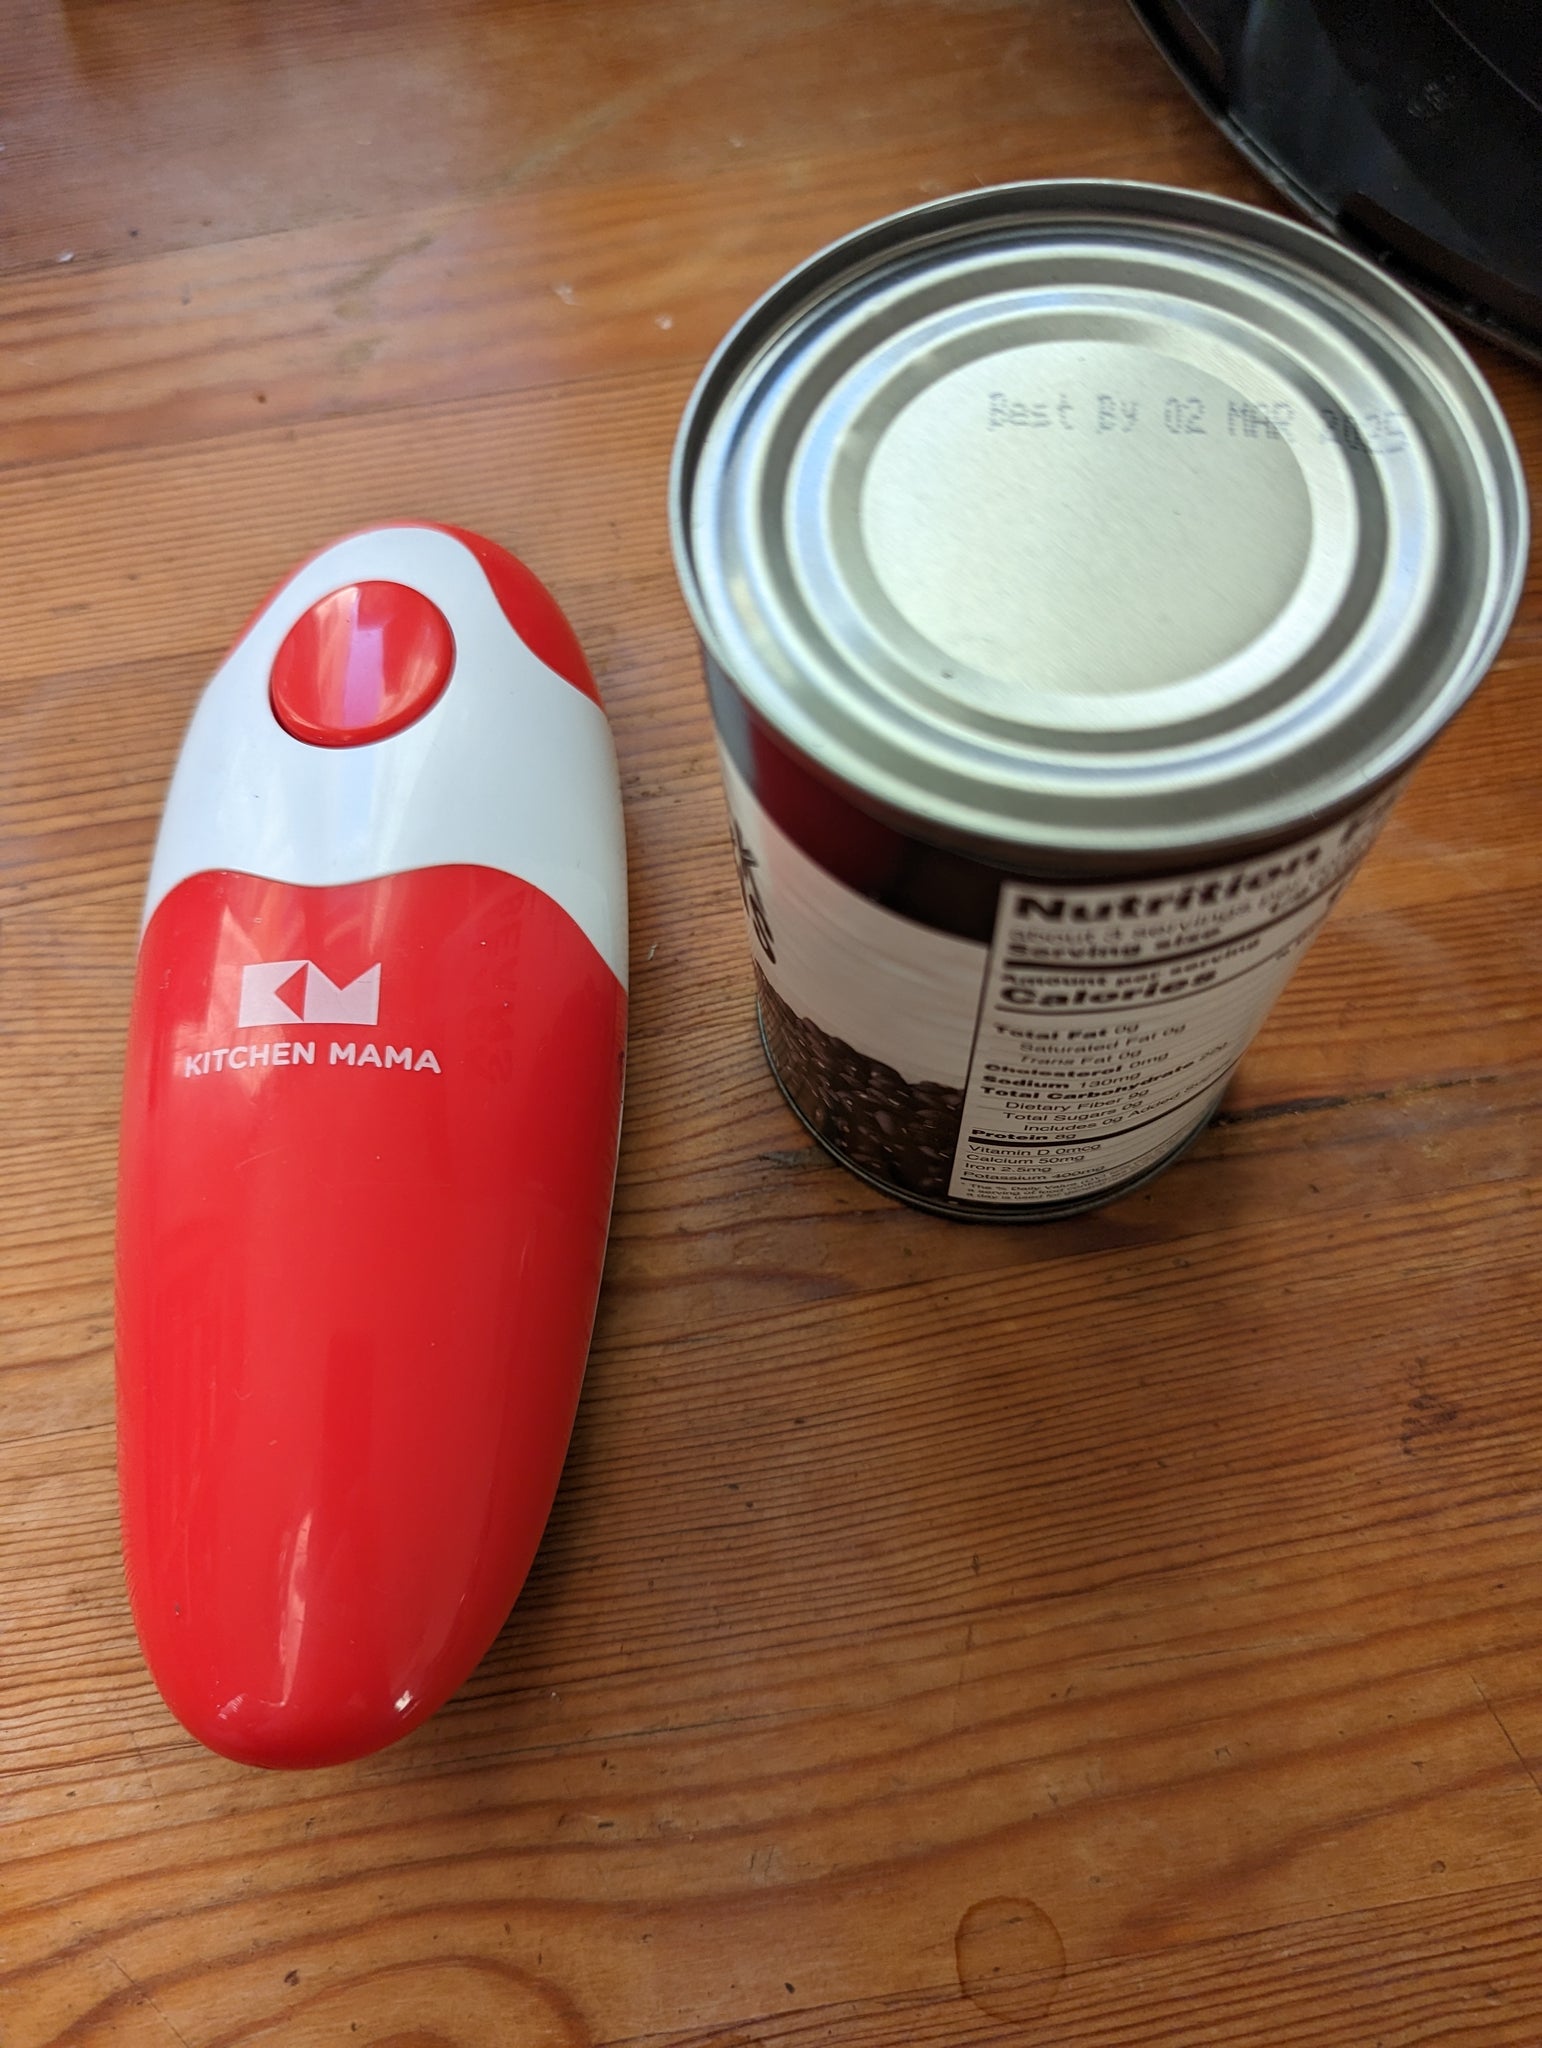 How to Use Electric Can Opener? 